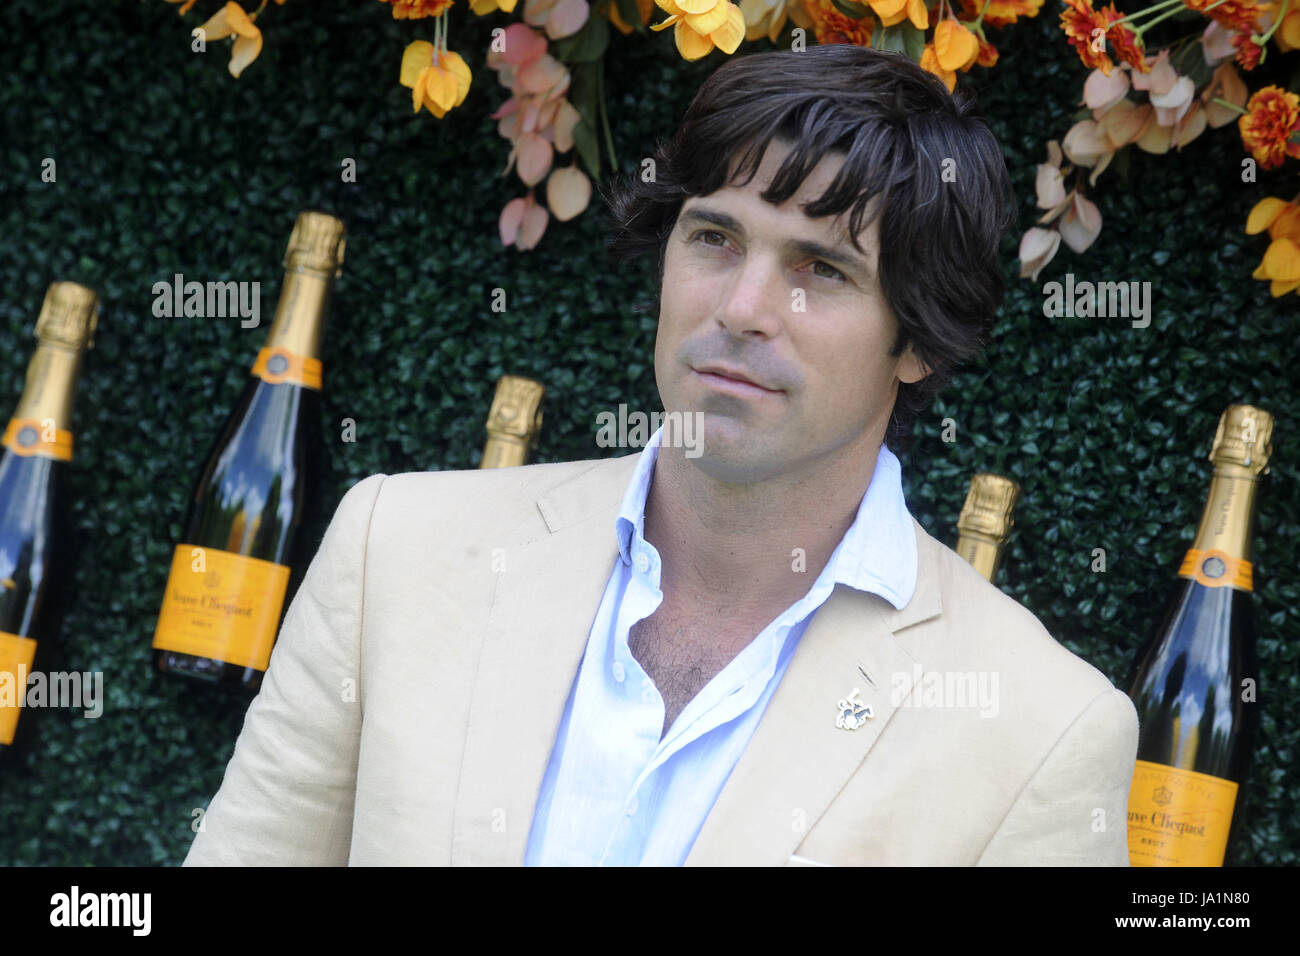 Jersey City, United States Of America. 03rd June, 2017. Nacho Figueras at the Veuve Clicquot Polo Classic in Liberty State Park. Jersey City, 03.06.2017 | usage worldwide Credit: dpa/Alamy Live News Stock Photo